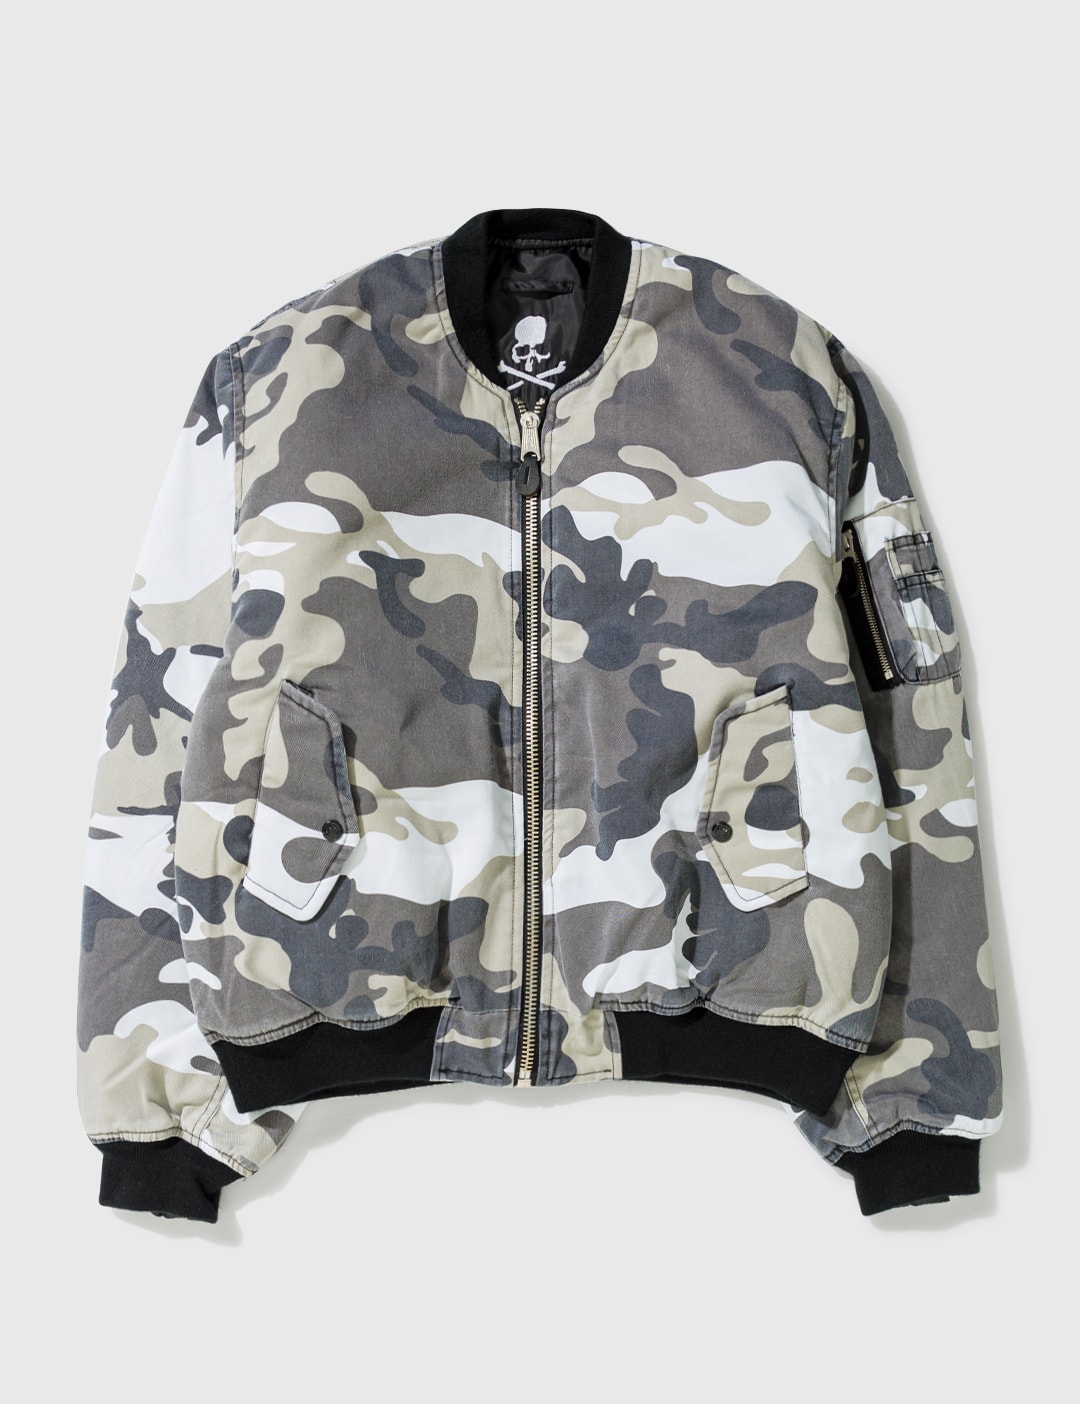 Trottoir Voorbeeld Bondgenoot Mastermind Japan - Fostex Garments Bomber Jacket | HBX - Globally Curated  Fashion and Lifestyle by Hypebeast